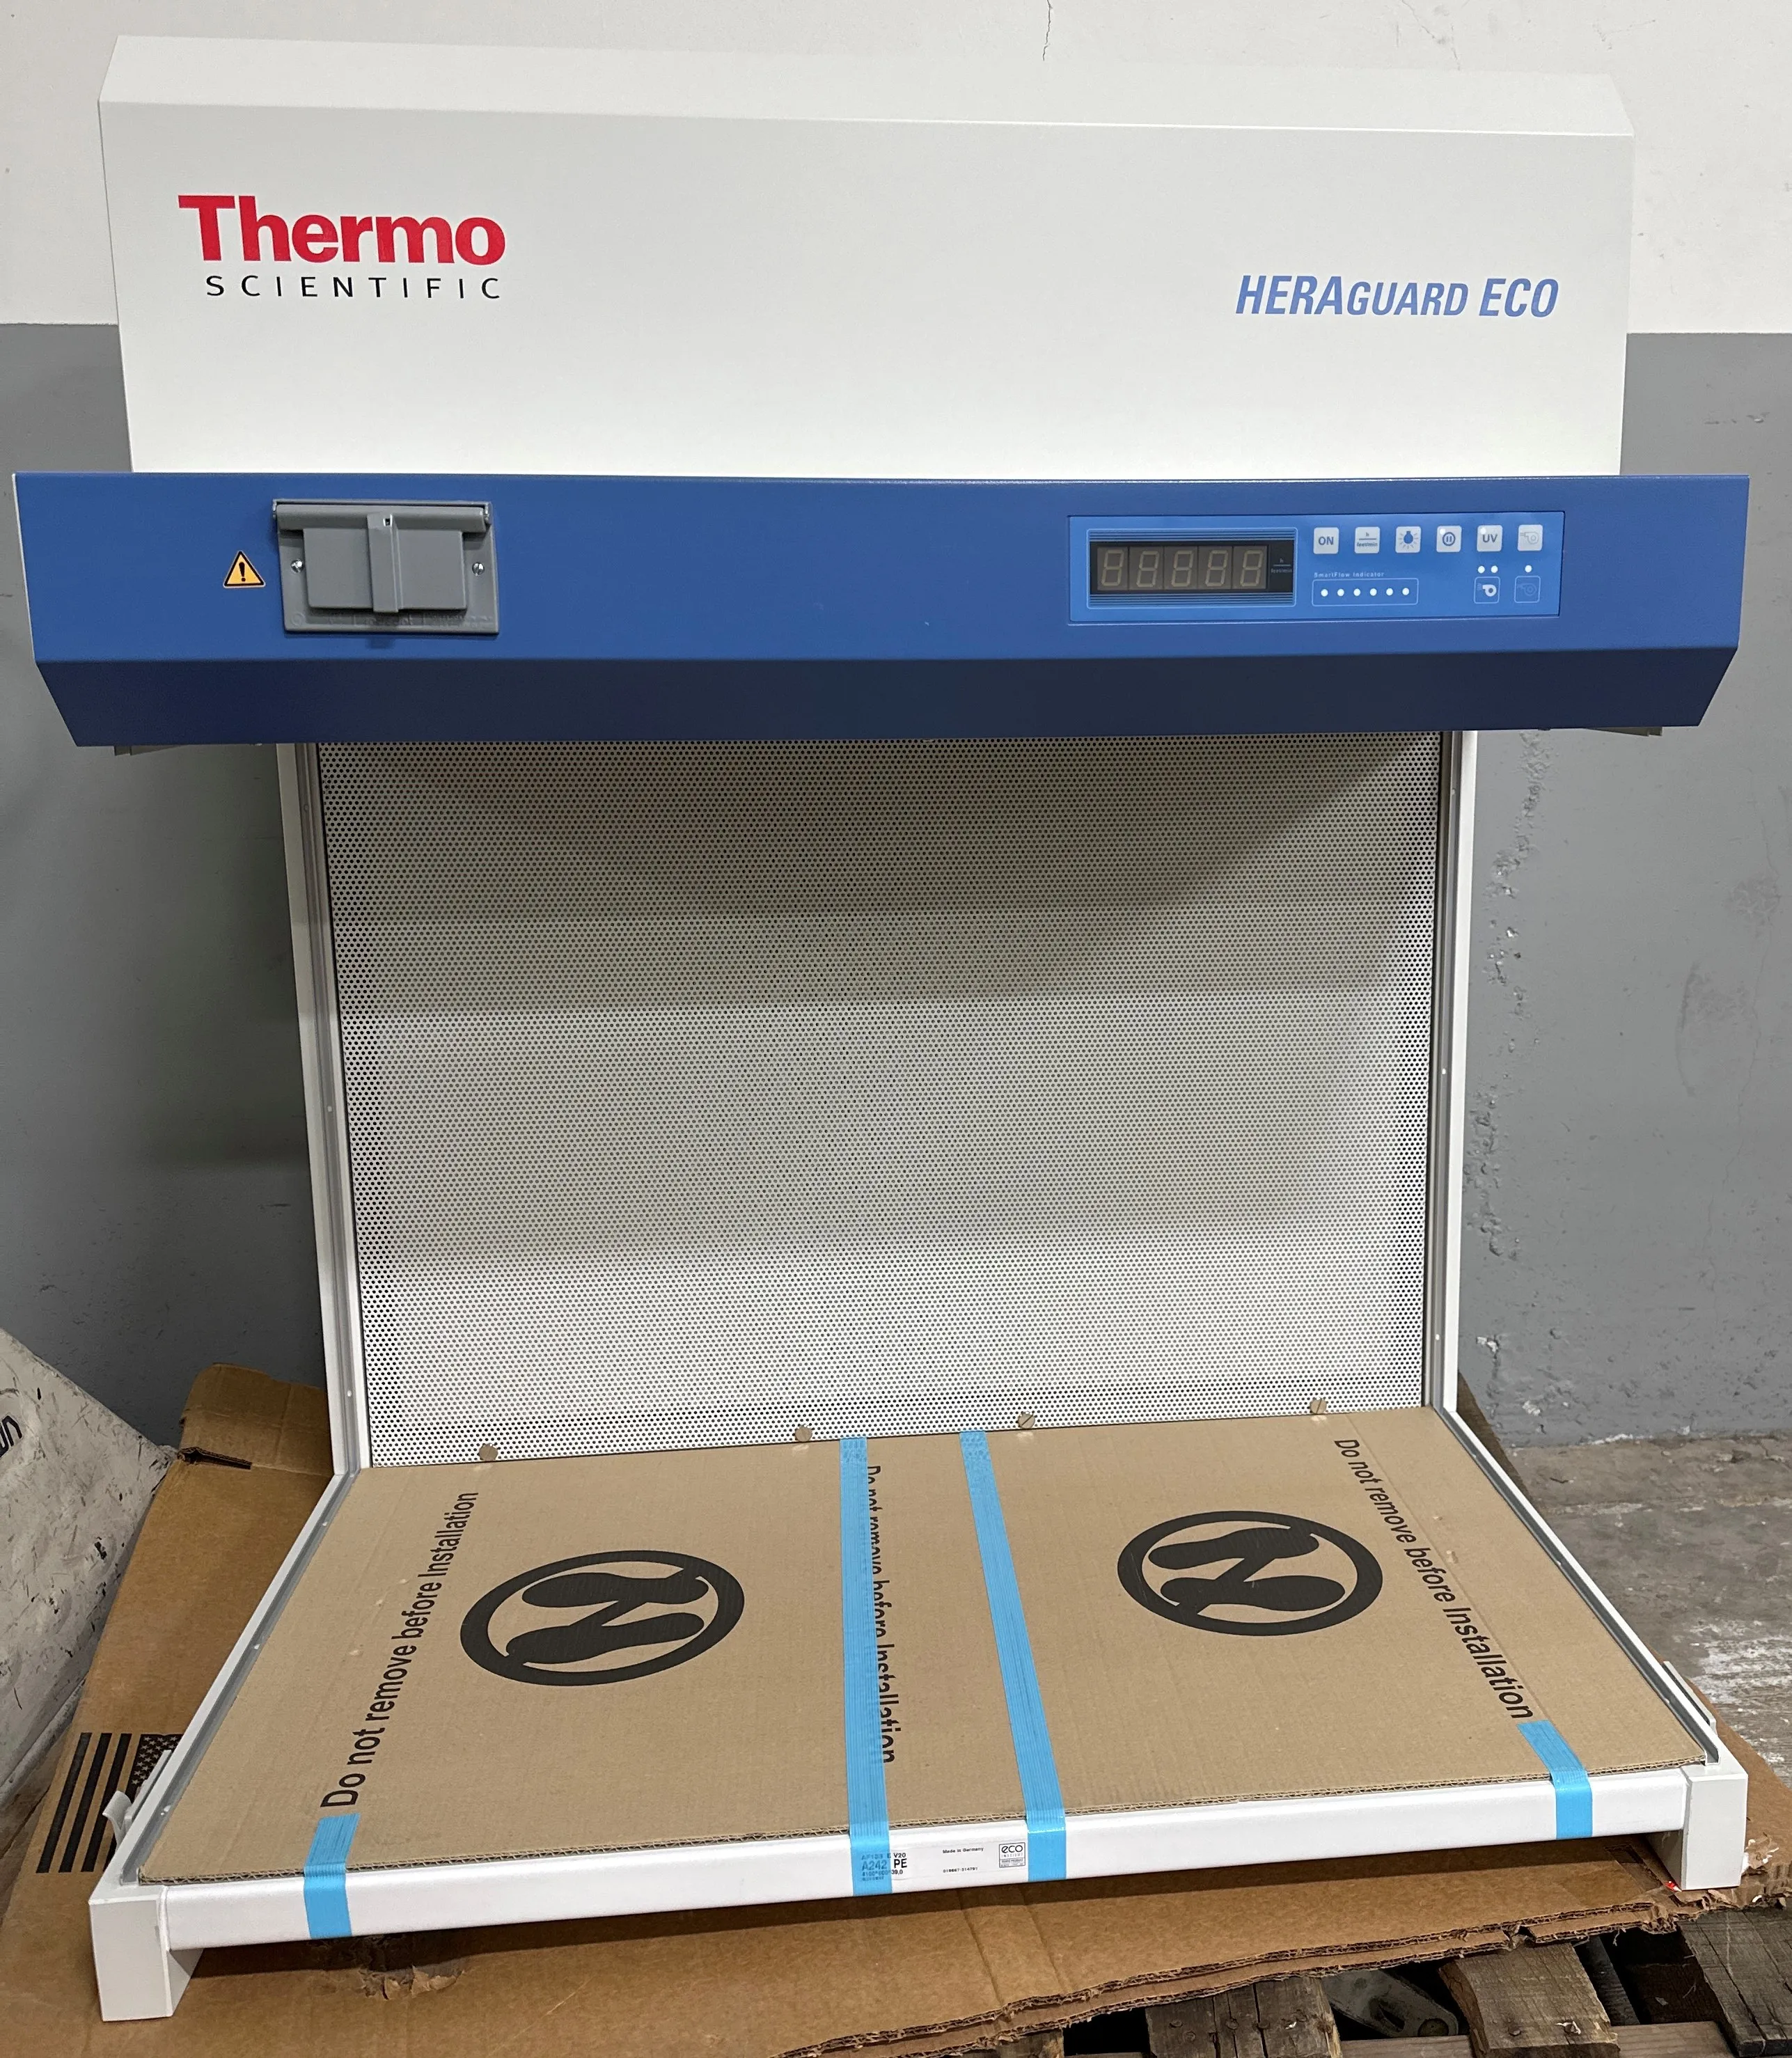 Thermo Scientific Heraguard Eco 0.9 Clean Bench With Accessories - New Open Box